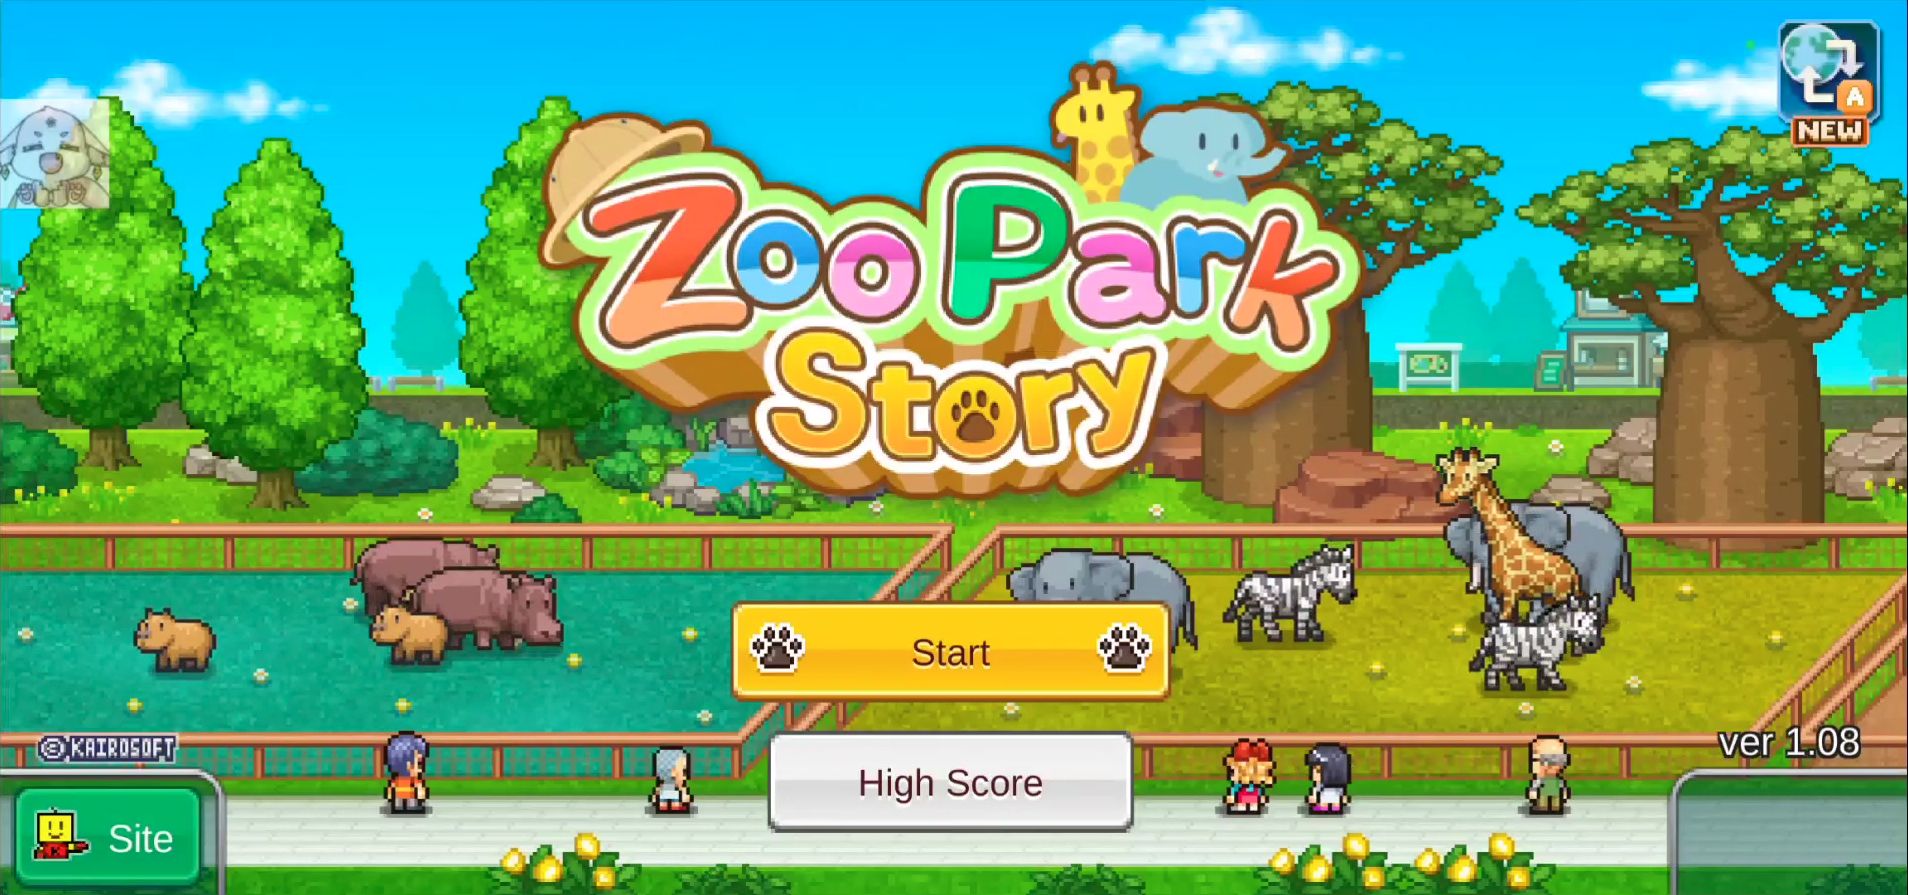 Scarica Zoo Park Story gratis per Android.